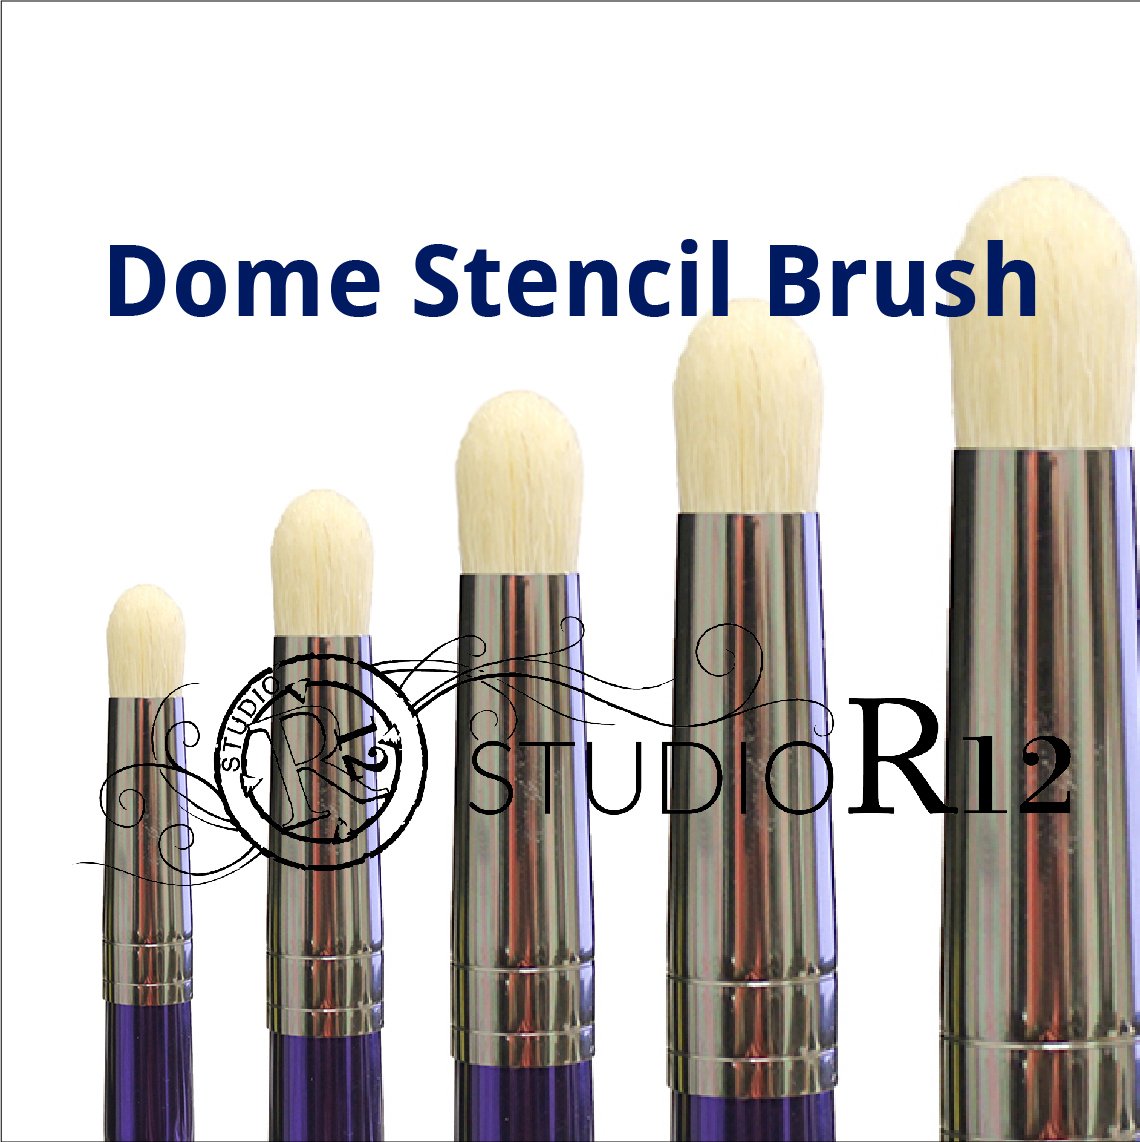 Dome Stencil Brush | Scumble | Swirl | Dry Brush | Prevent Bleeding | DIY Crafting & Painting Tools | Select Size (Set of 3 (3/8, 1/2, 5/8))